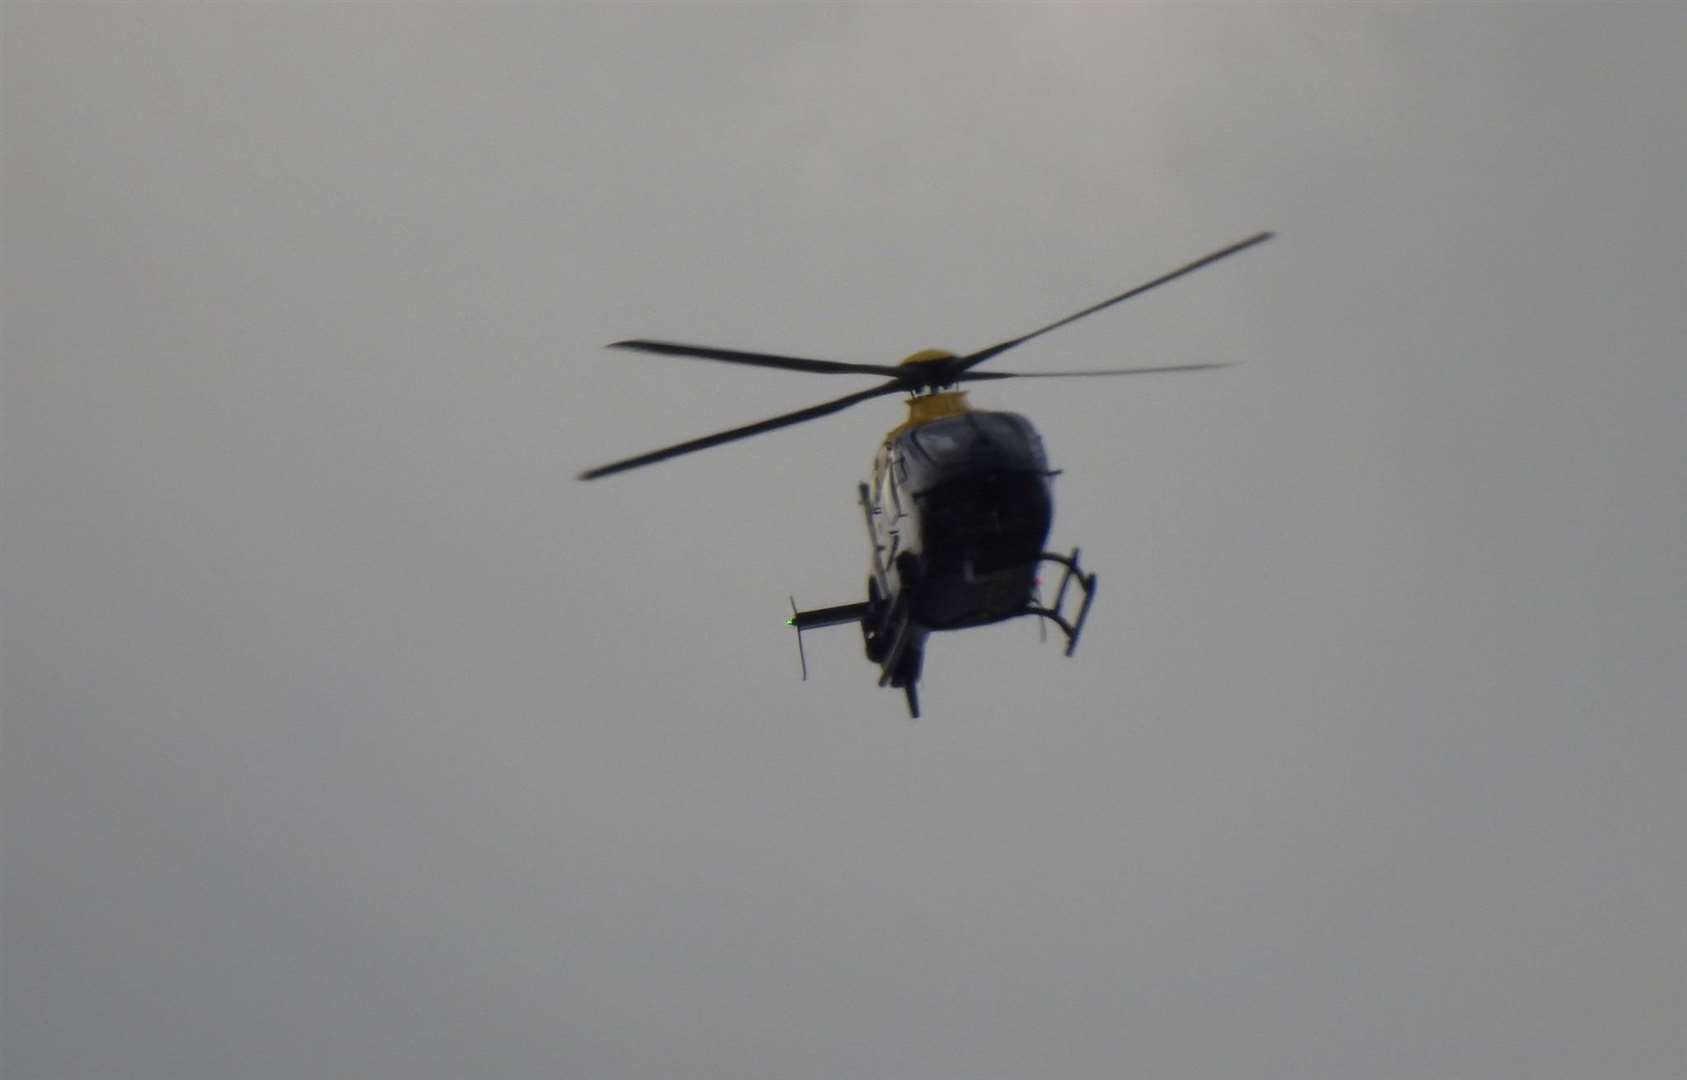 A police helicopter was seen flying over Sheppey. Picture: Swale Weather